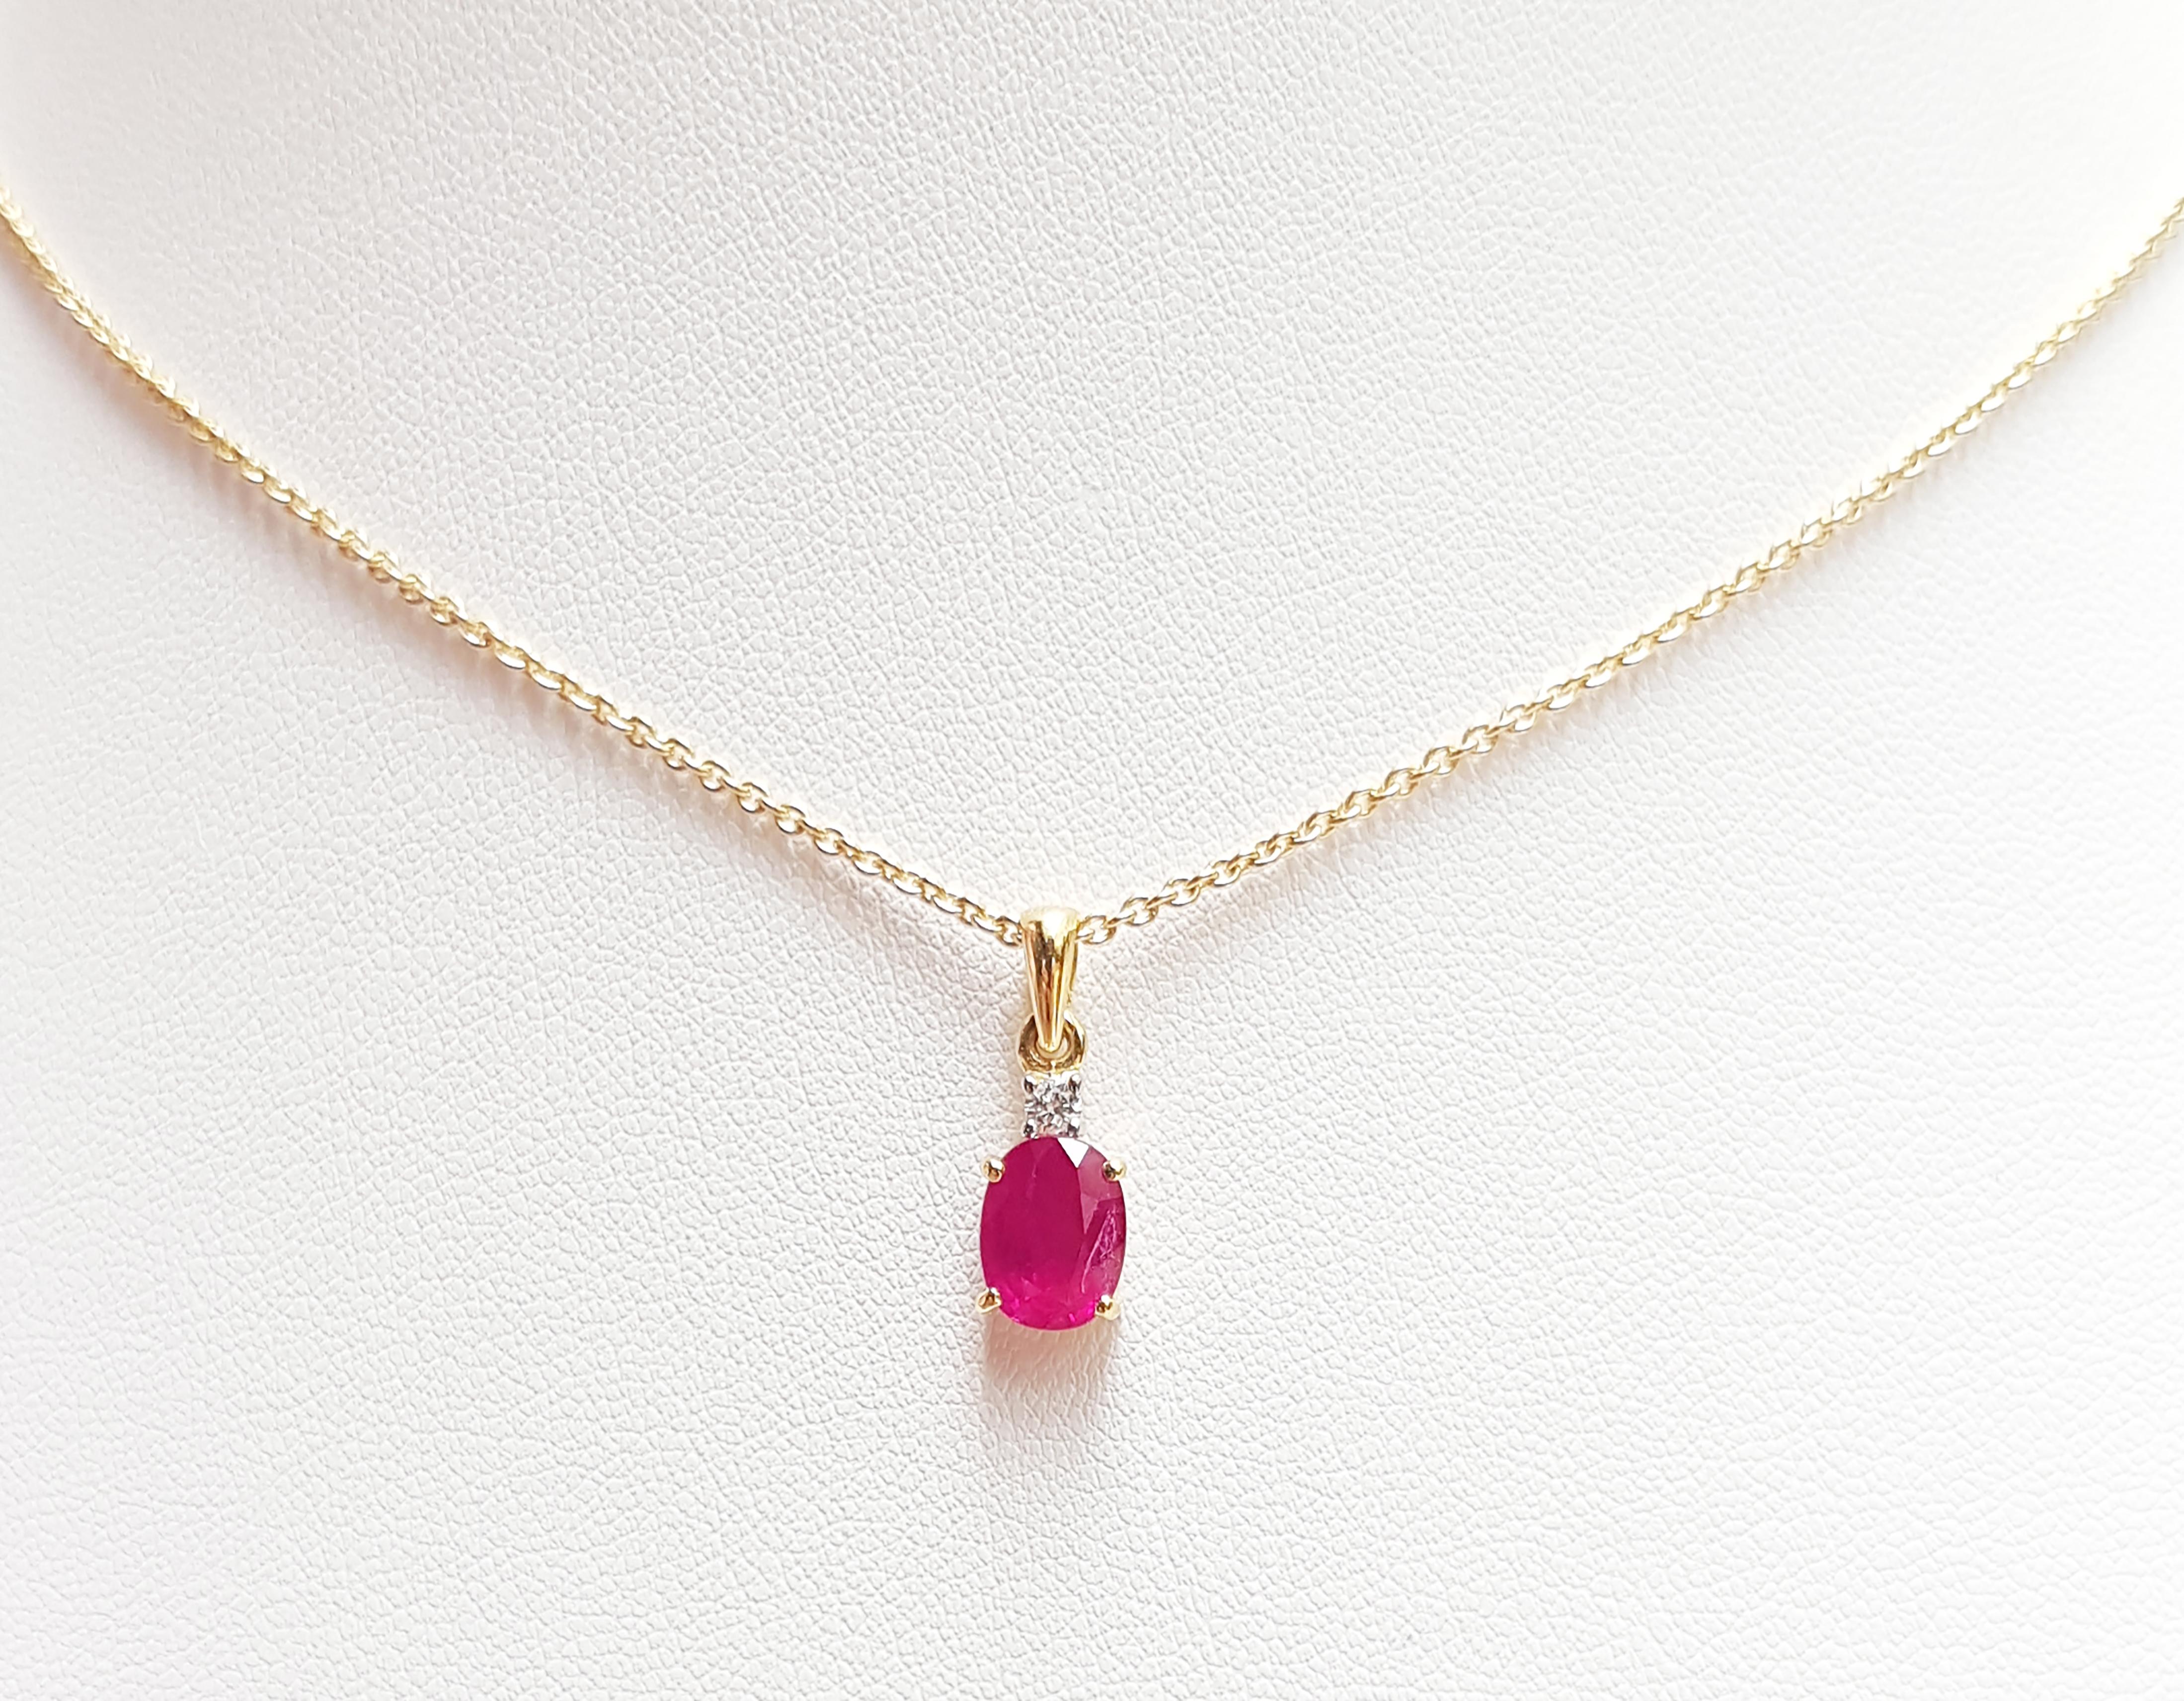 Ruby 1.68 carats with Diamond 0.05 carat Pendant set in 18 Karat Gold Settings
(chain not included)

Width: 0.6 cm 
Length: 1.6 cm
Total Weight: 1.18 grams

